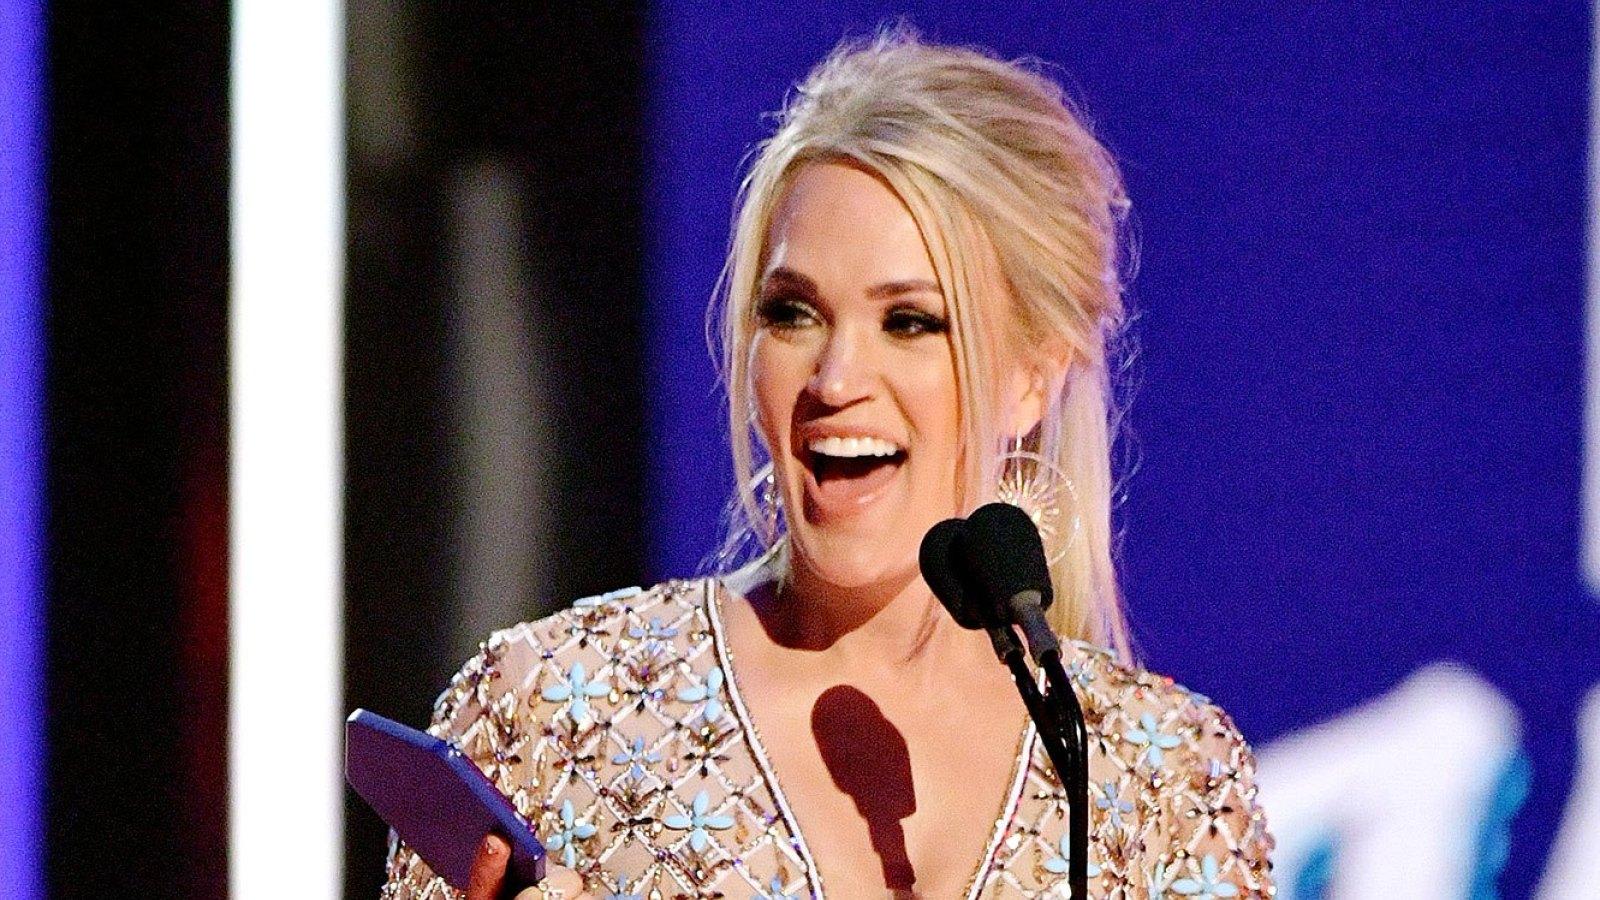 CMT Awards 2019: Carrie Underwood Earns Historic 20th Win